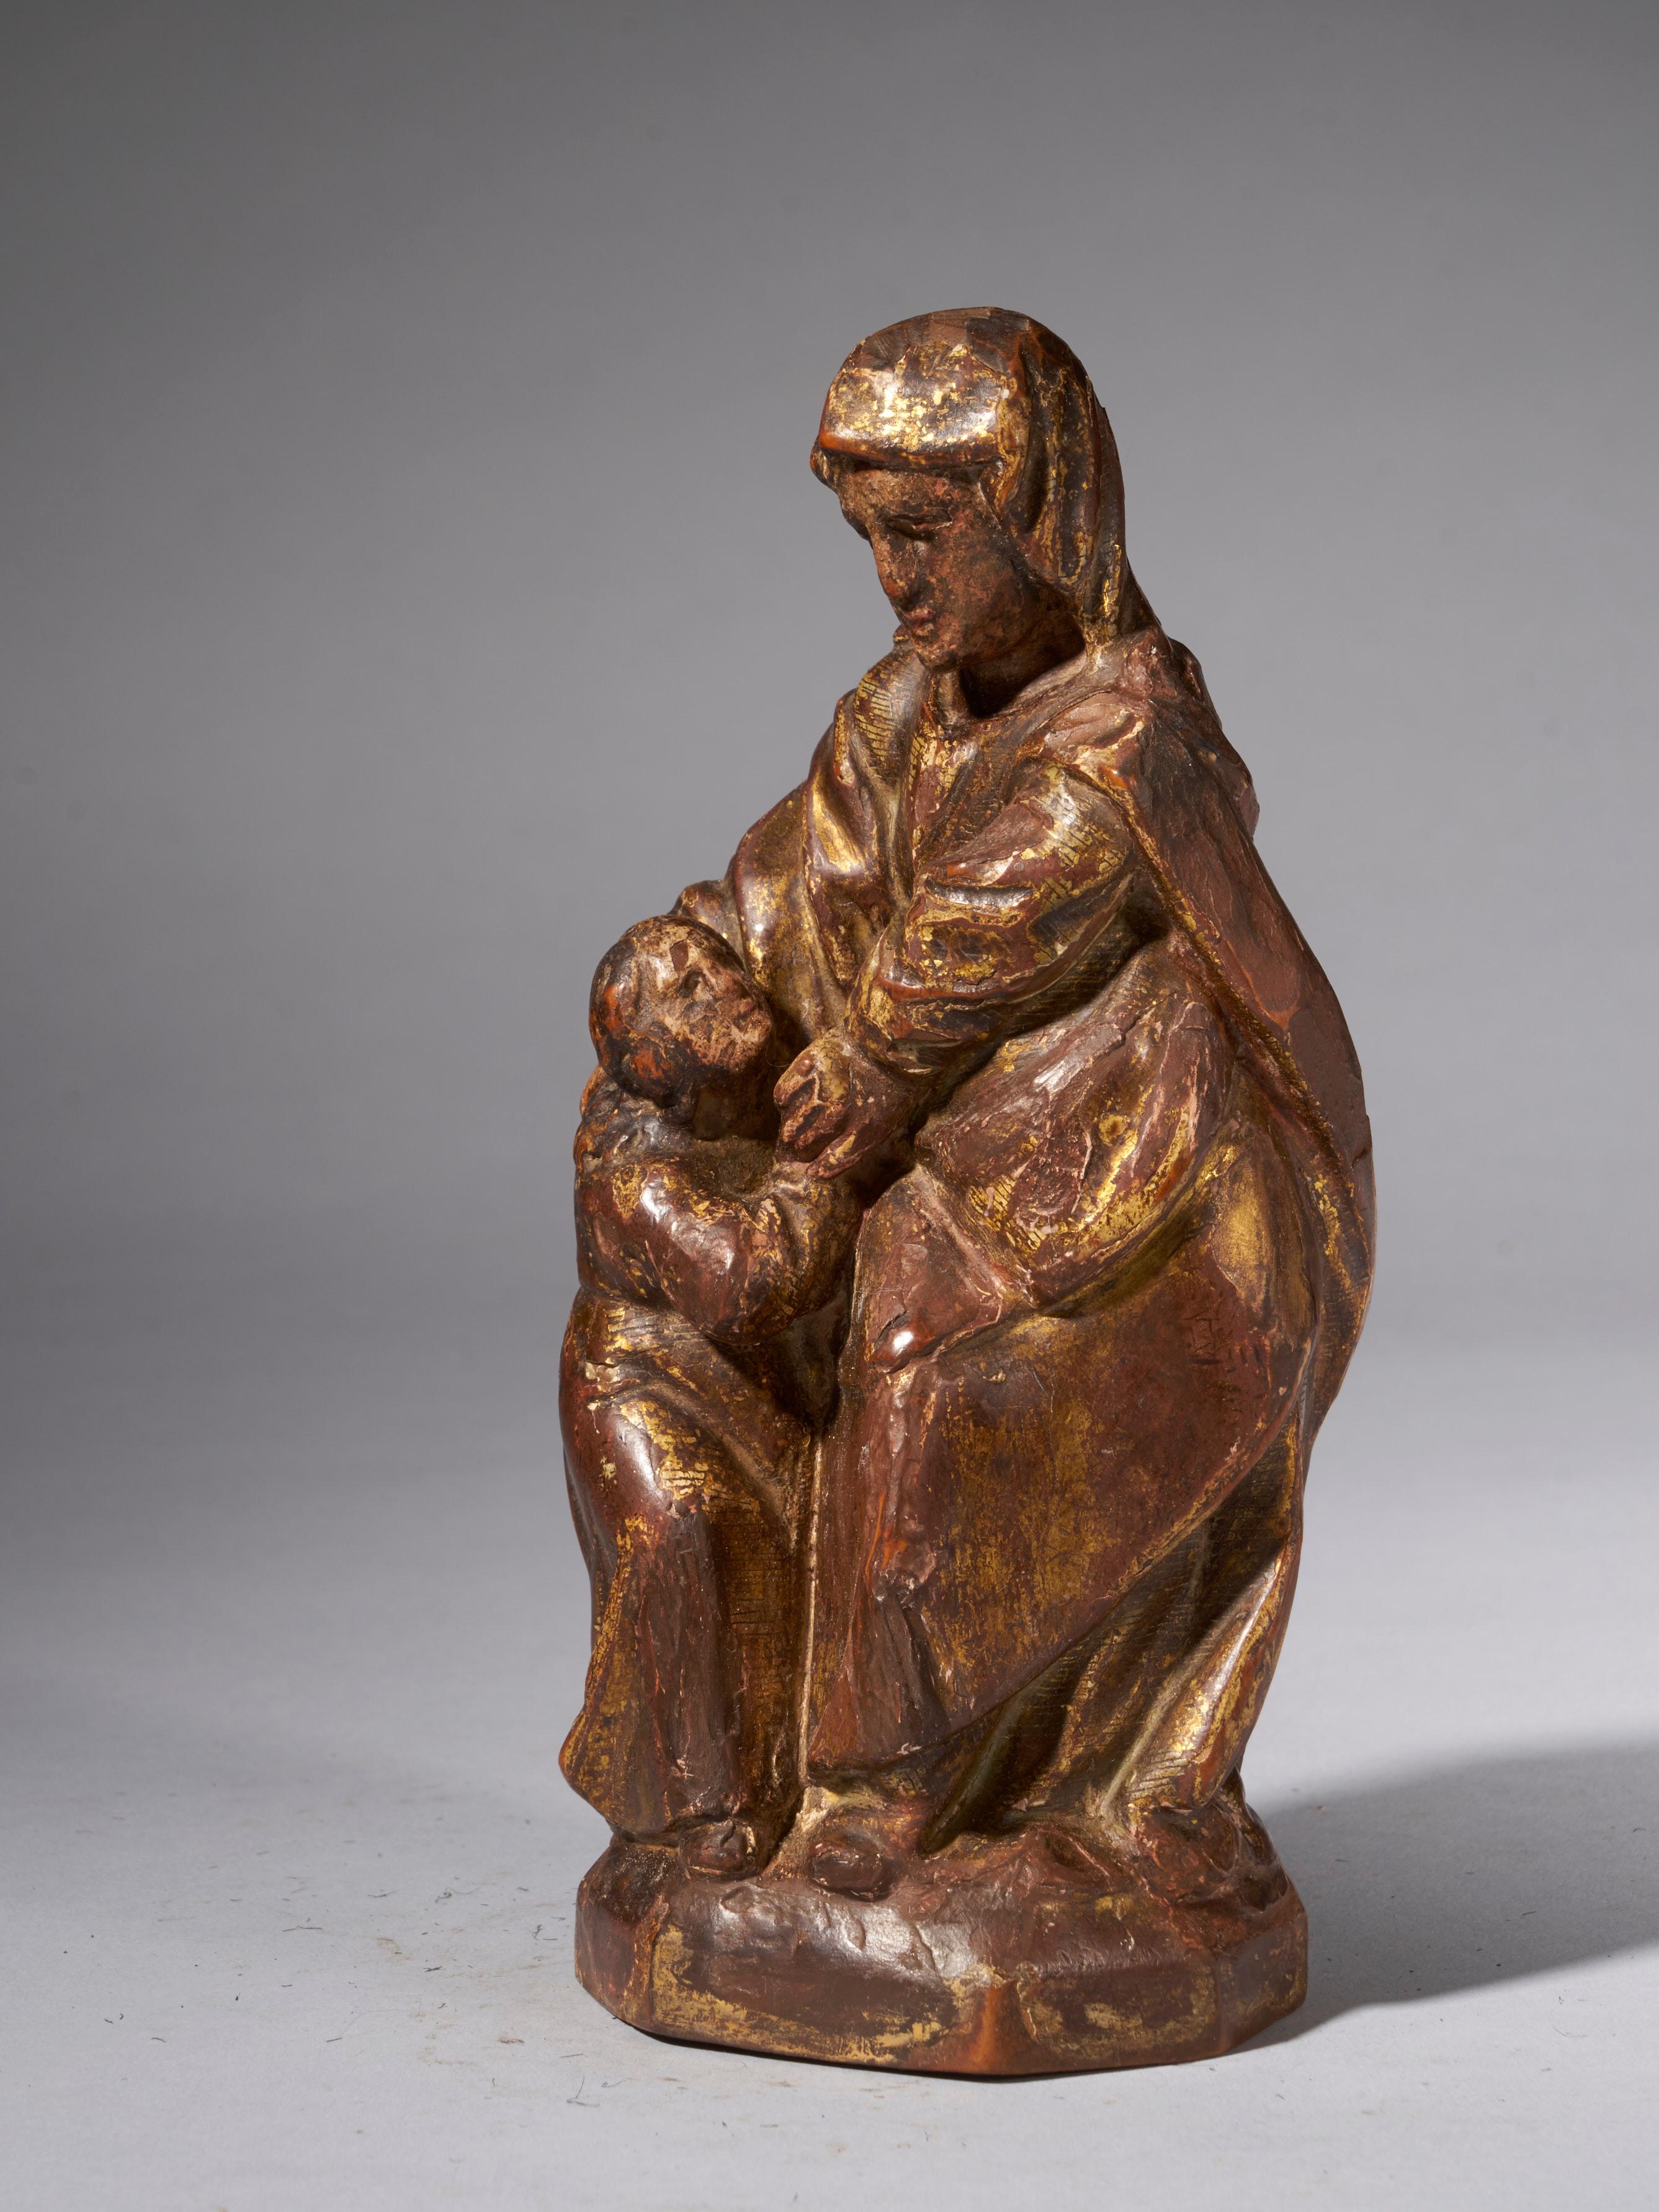 This 18th century wooden sculpture represents Mary looking down at Jesus by her side, sculpted in a block of wood, folk style. The folds of the robes and the creases in the faces are clearly visible. The sculpture was polychromed and show nice signs